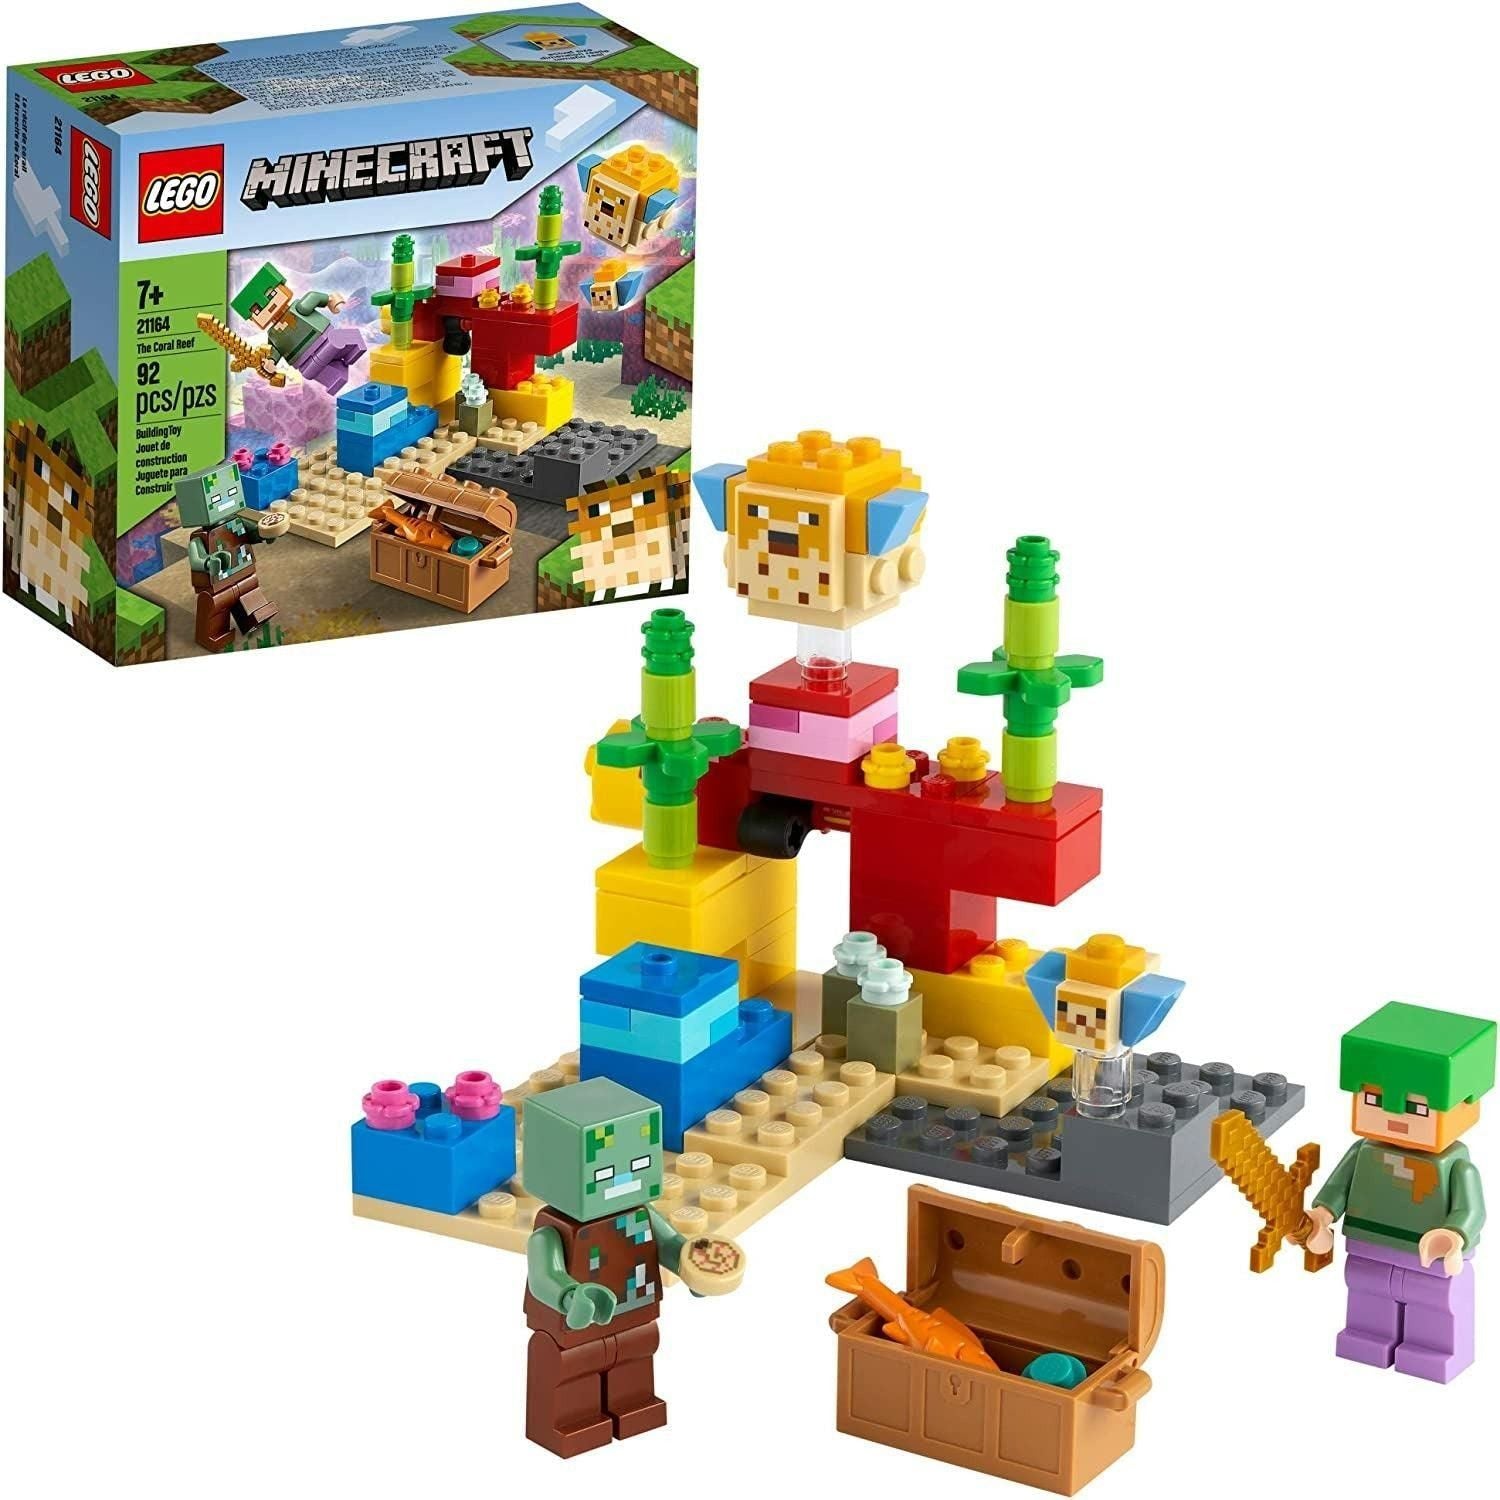 LEGO Minecraft The Coral Reef 21164 Hands-on Minecraft Marine Toy (92 Pieces) - BumbleToys - 6+ Years, 8+ Years, 8-13 Years, Boys, LEGO, Minecraft, OXE, Pre-Order